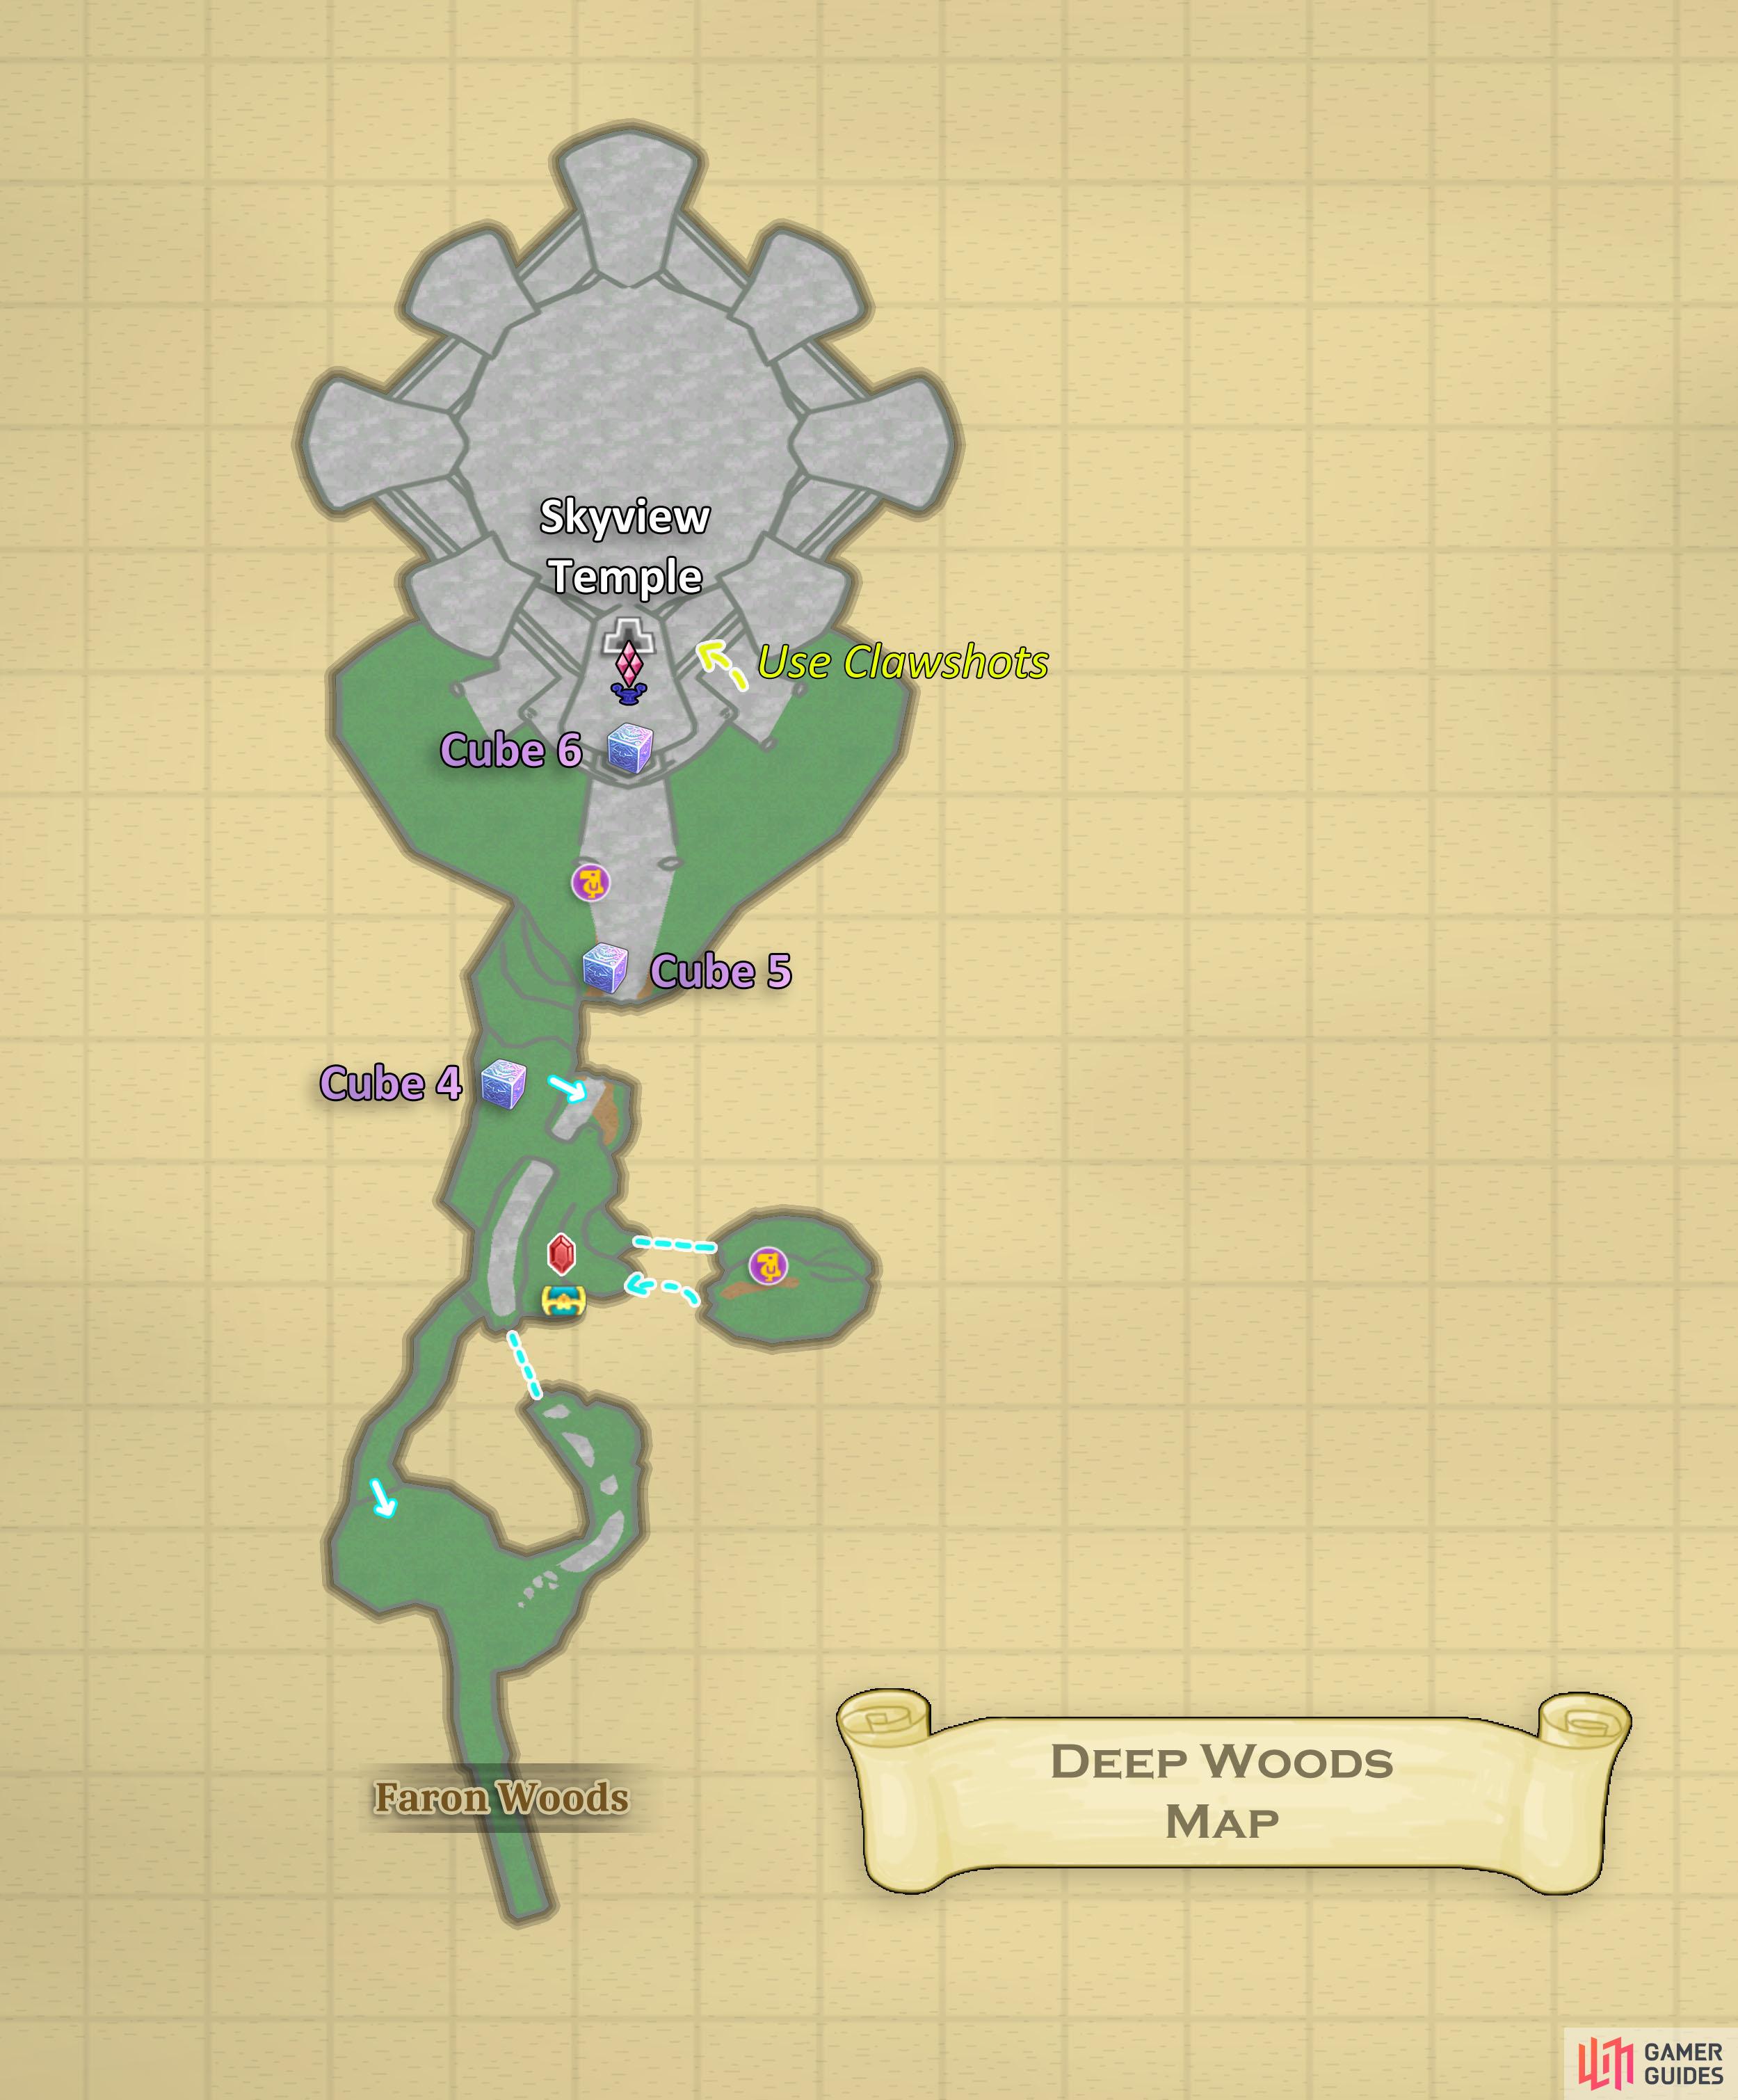 Map of the Deep Woods